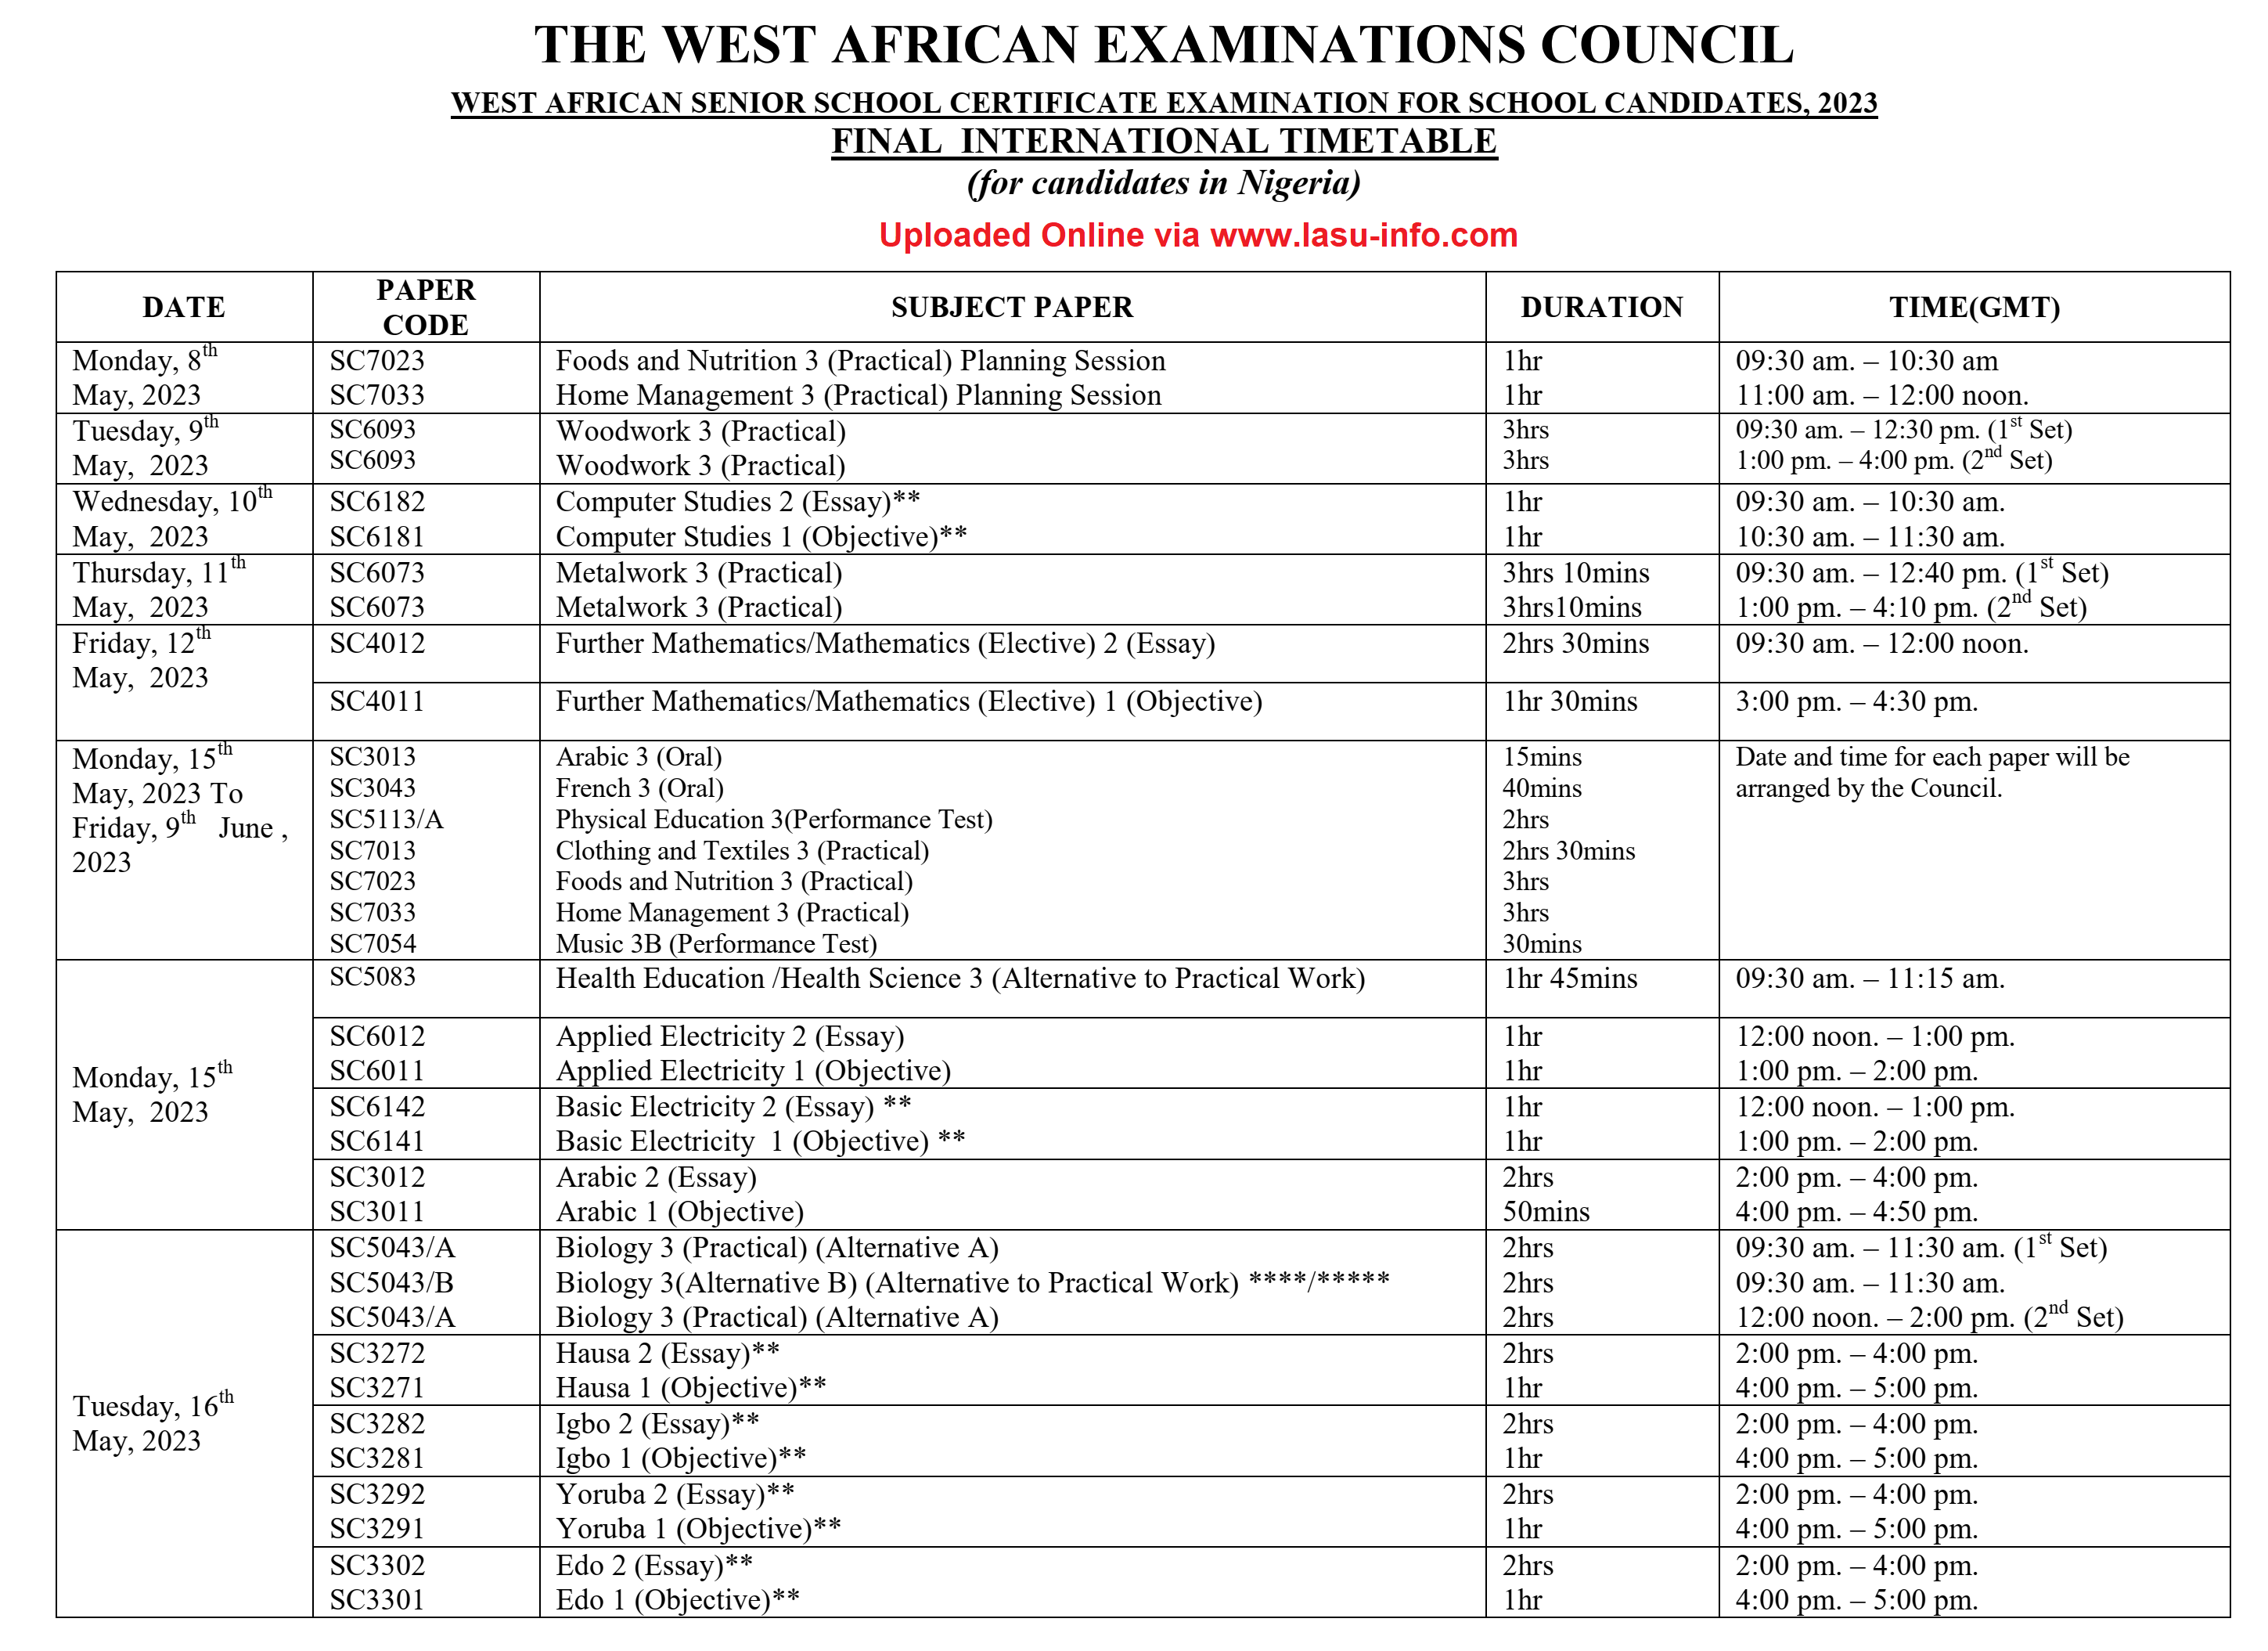 2023 WAEC Timetable for School Candidates [8th May - 23rd June]